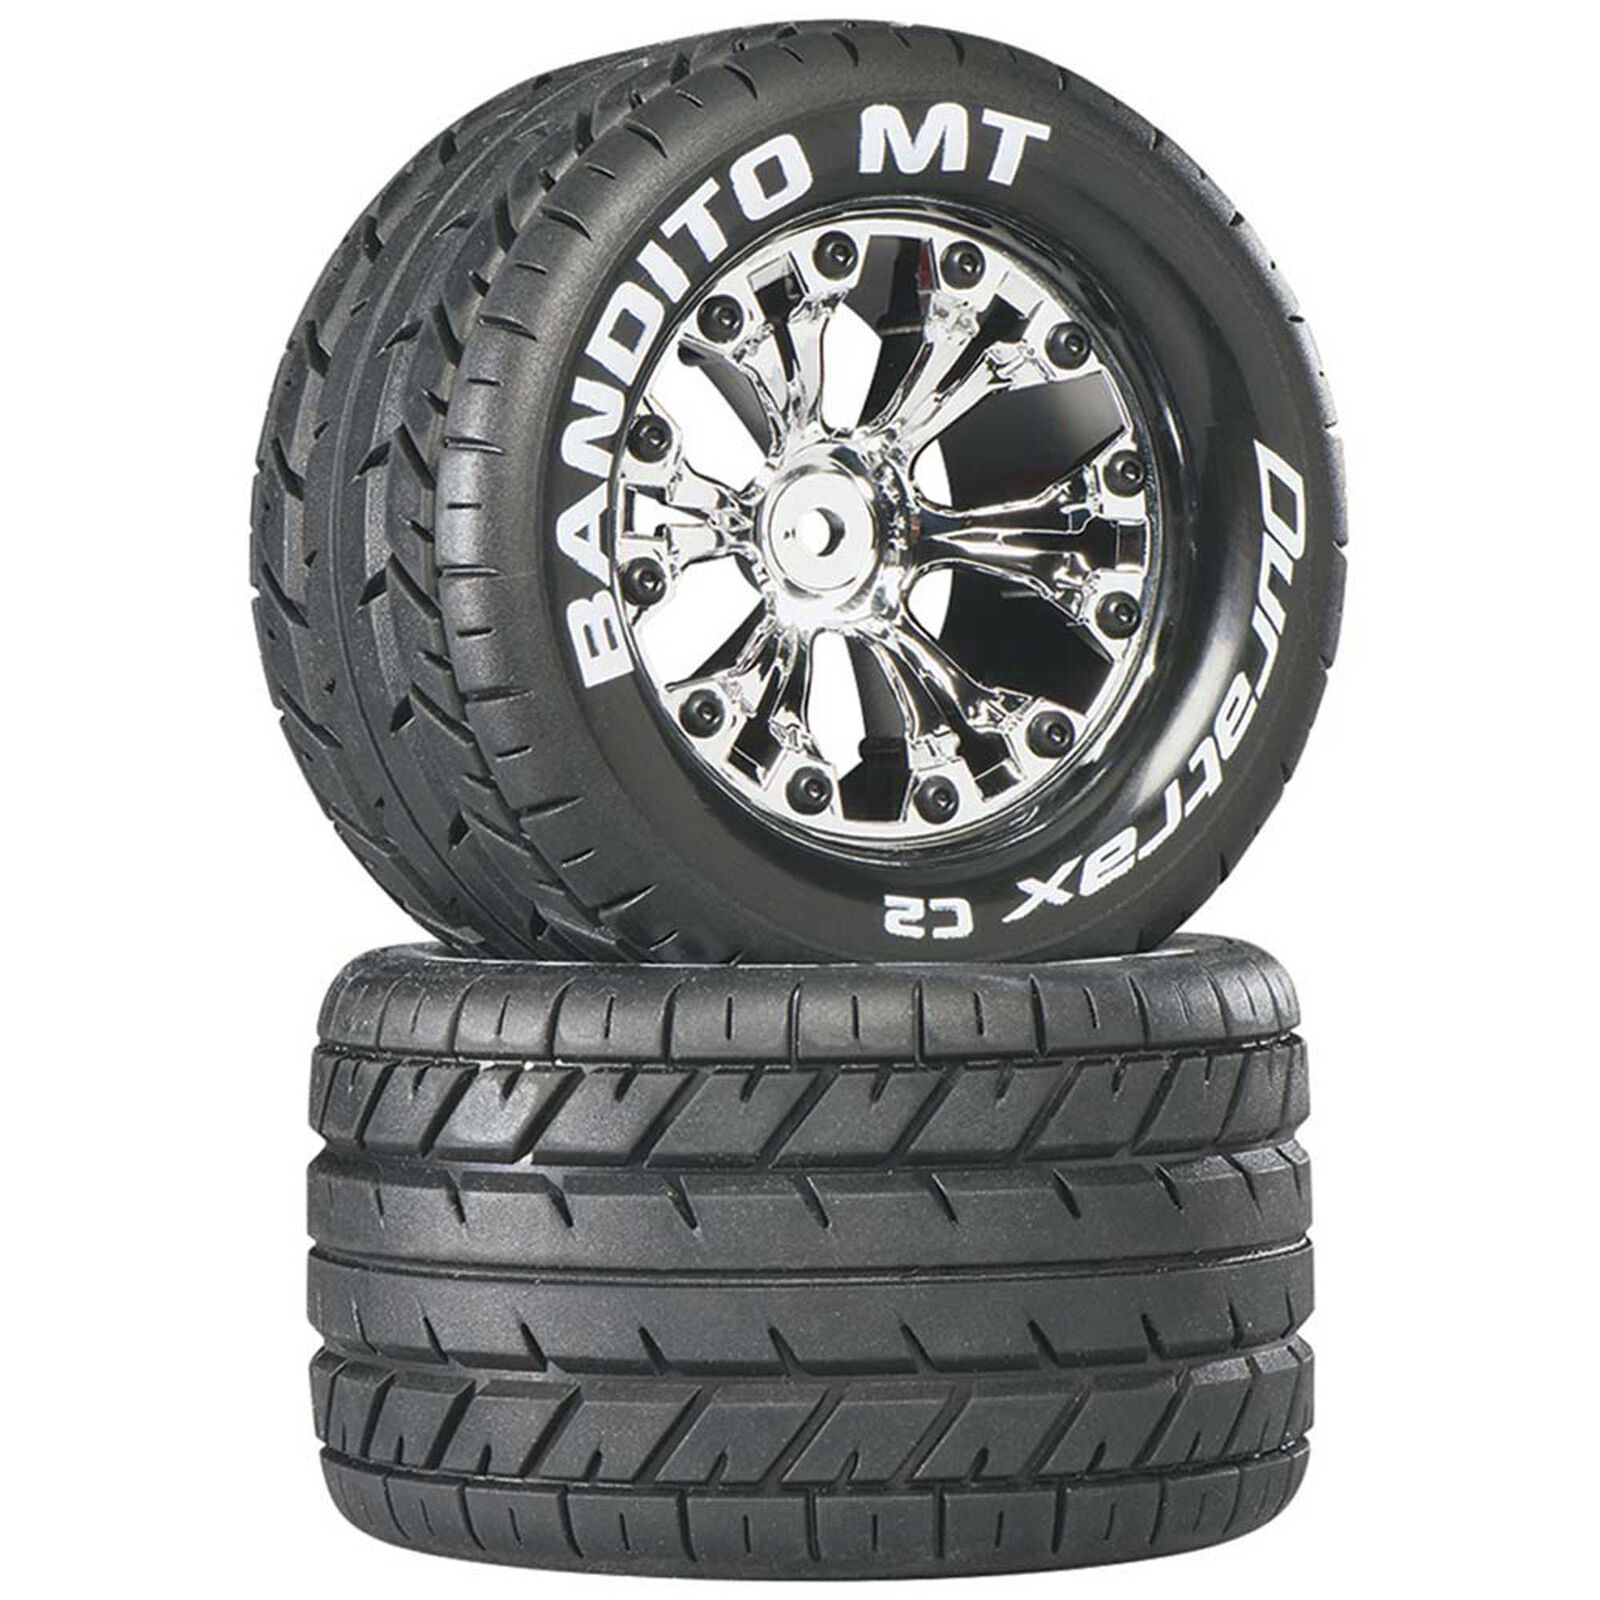 Bandito MT 2.8" 2WD Mounted Rear Tires, Chrome (2)